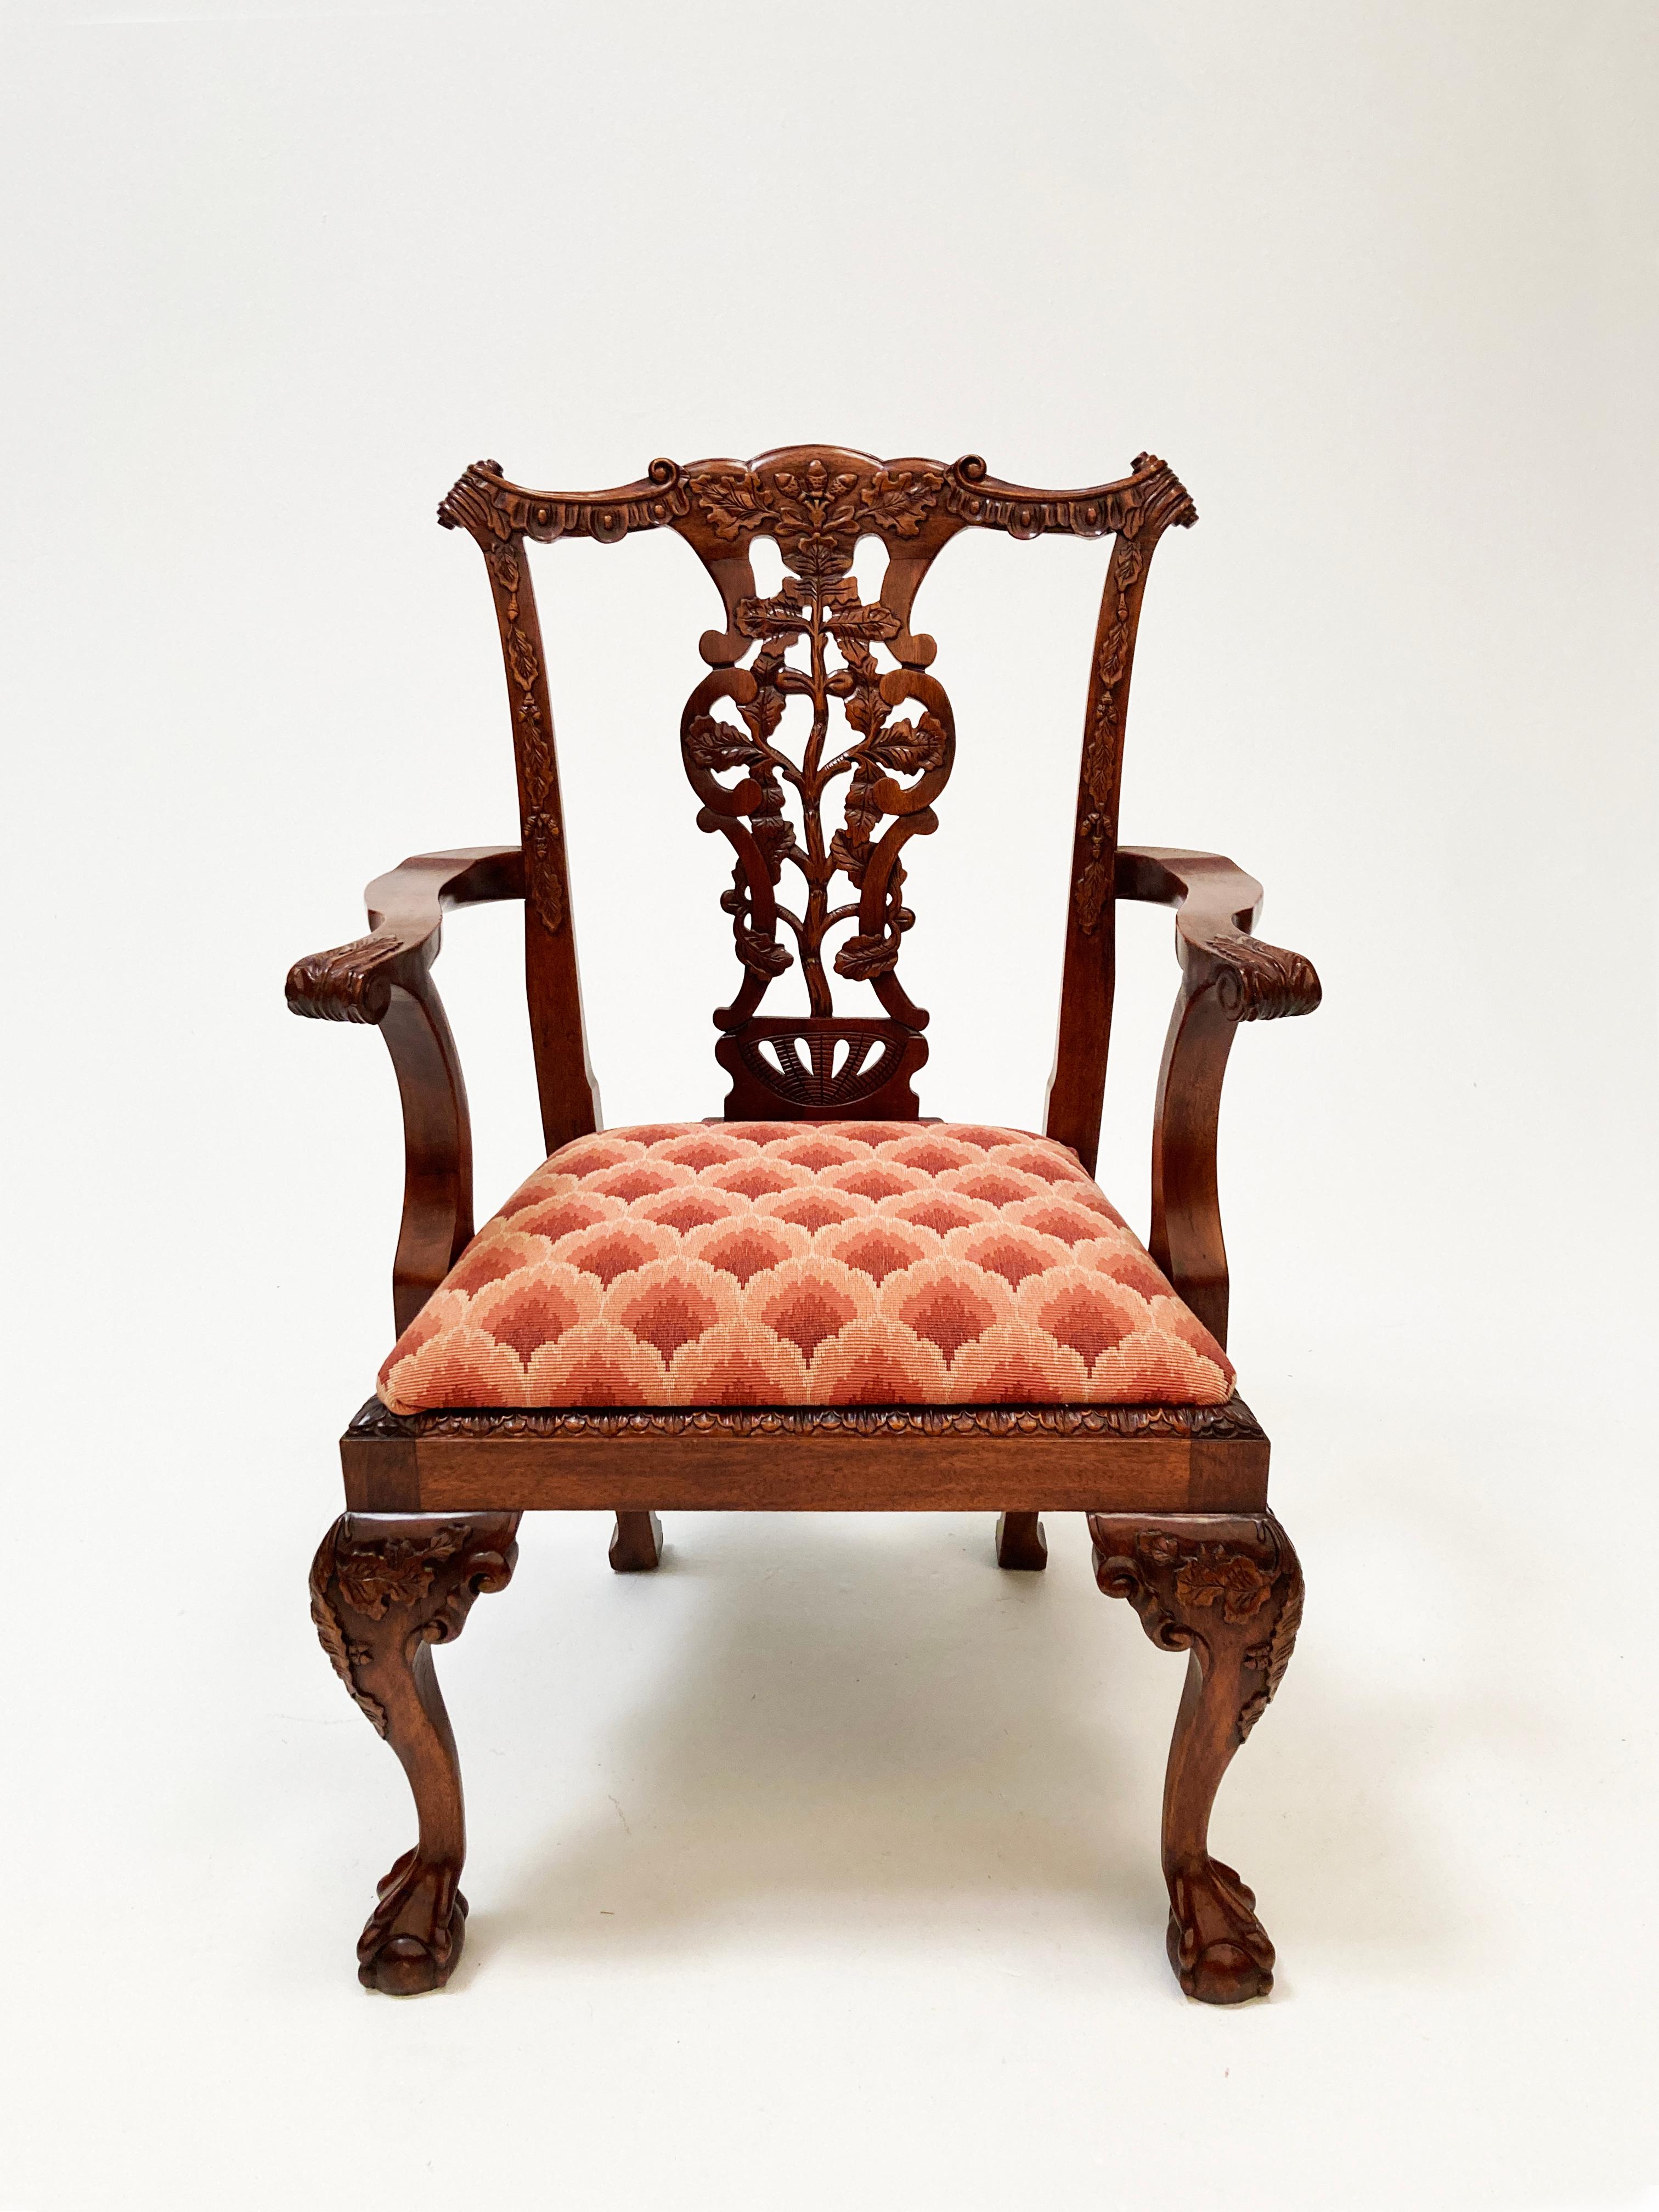 Hand-Carved Mid 19th Century Pair of Early English Mahogany Chippendale Open Arm Chairs For Sale